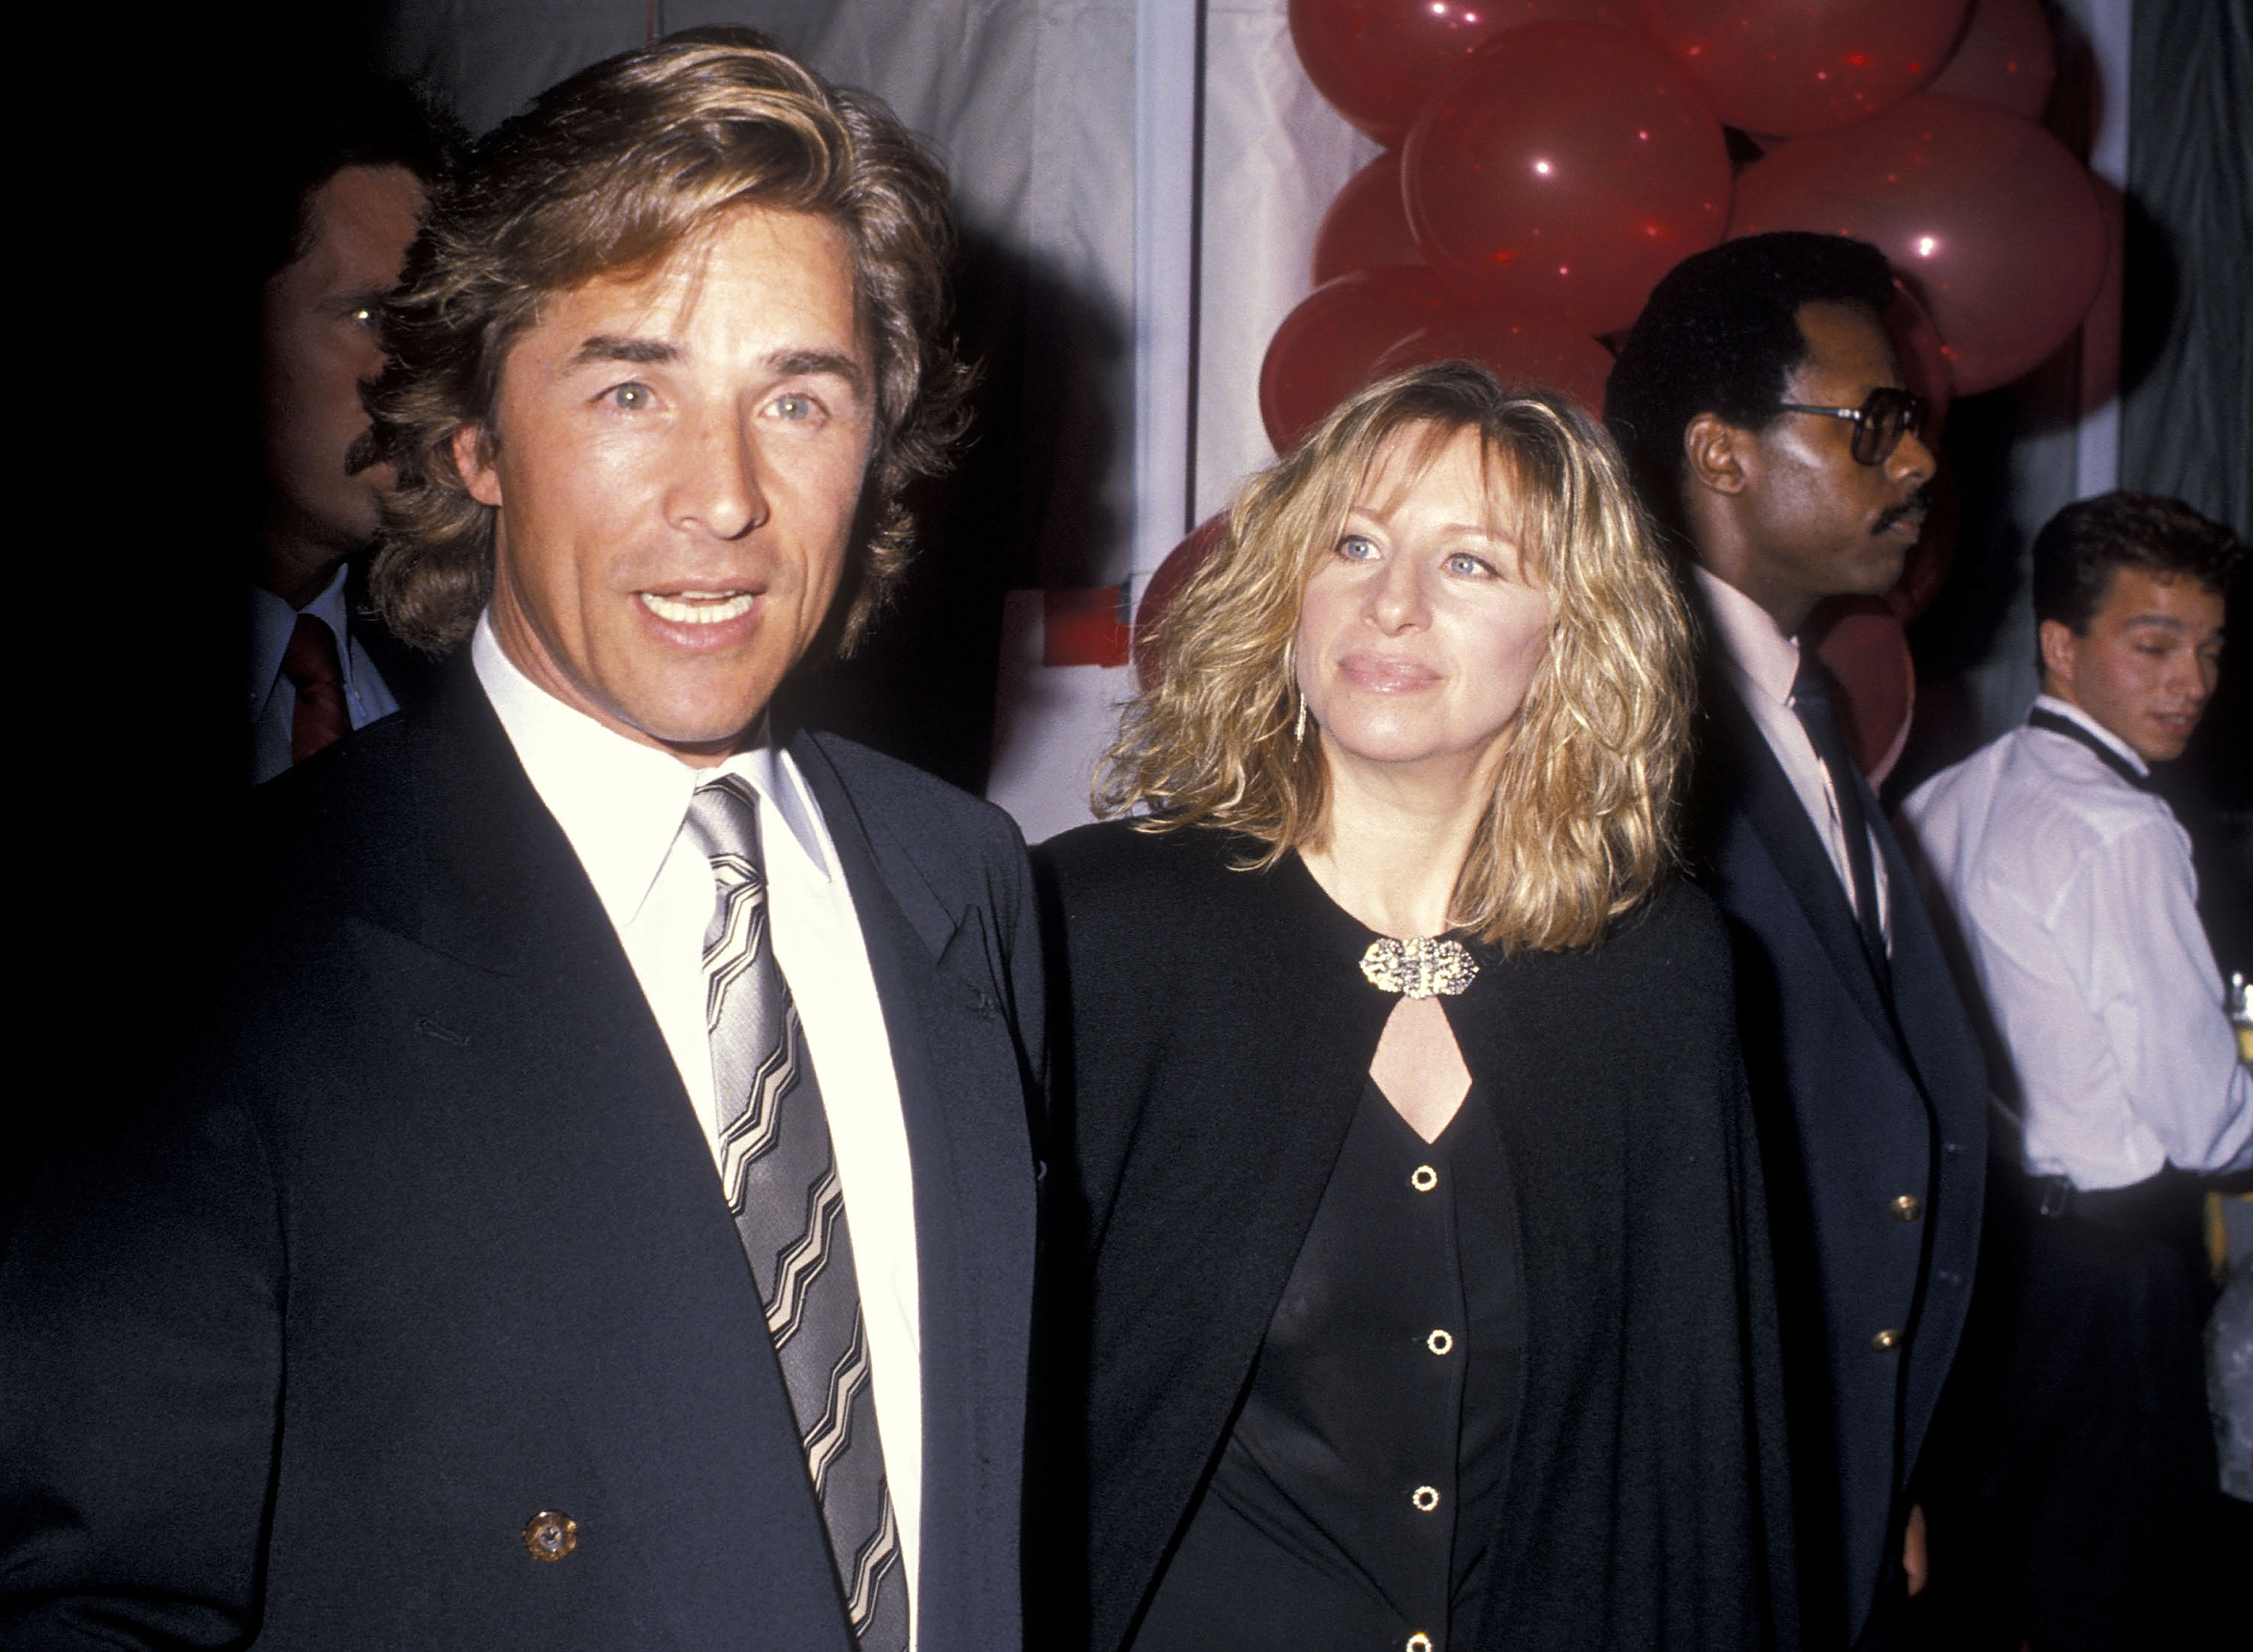 Don Johnson and Barbra Streisand attend the "Sweet Hearts Dance" Westwood premiere and after-party in Westwood, California on September 18, 1988 | Source: Getty Images